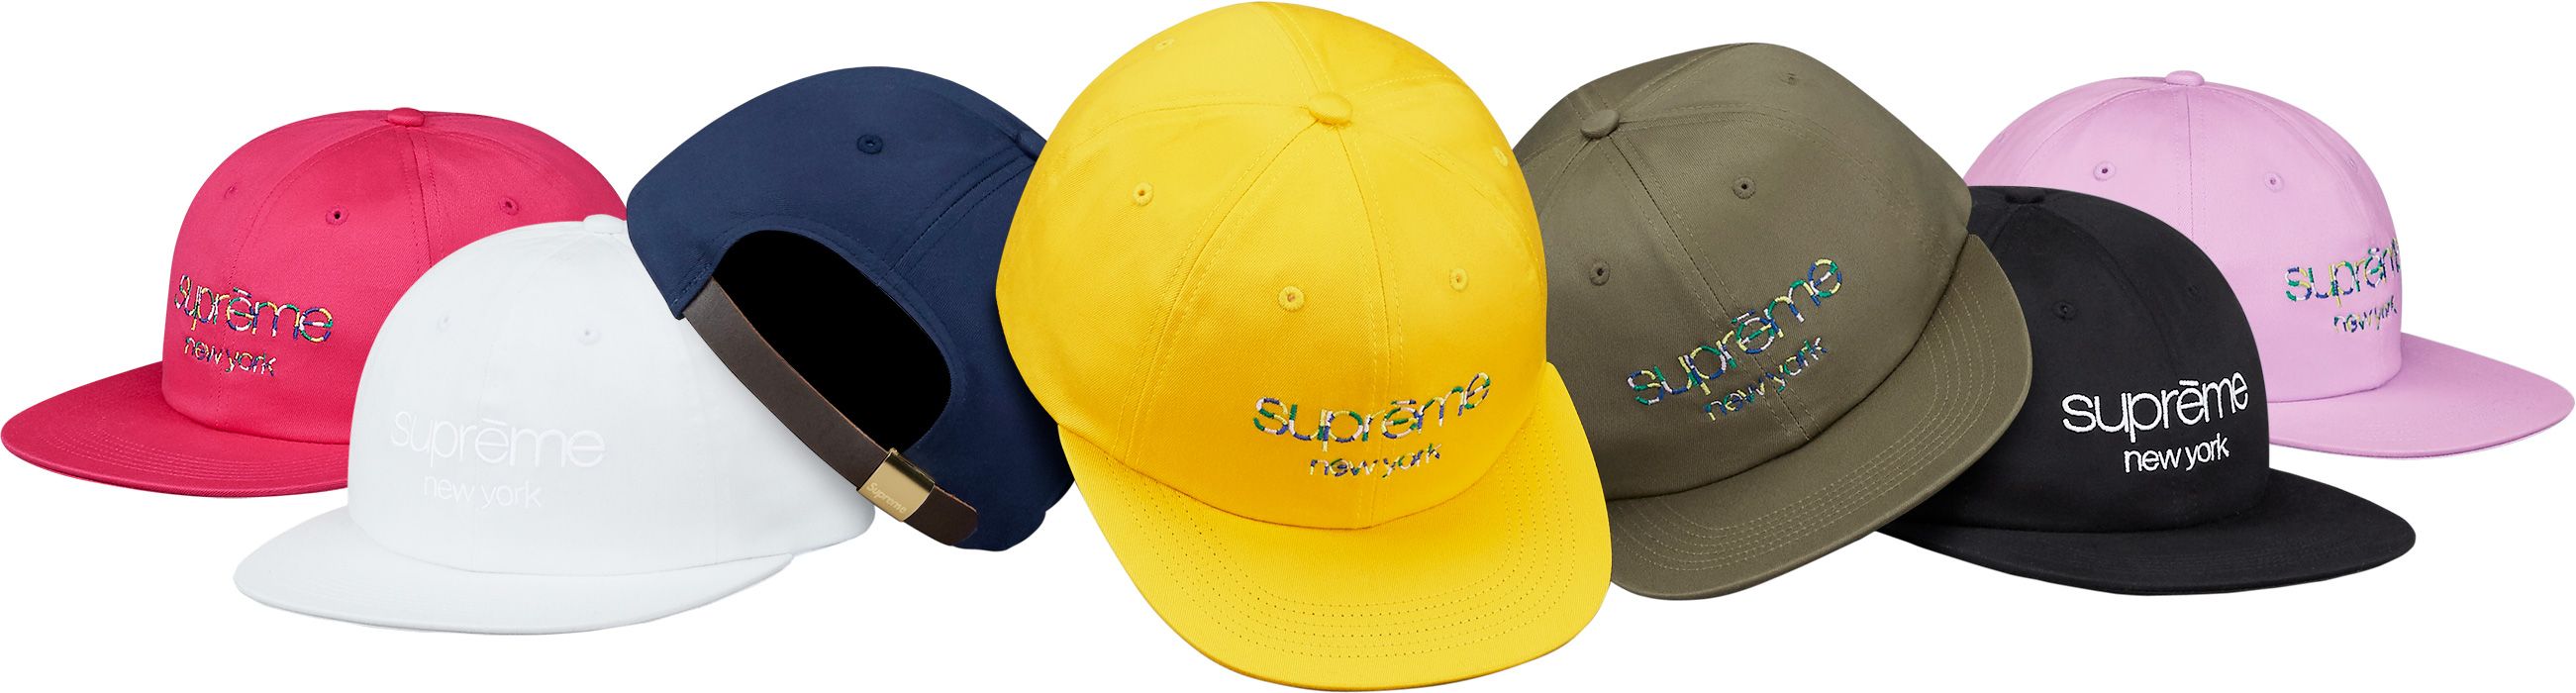 Go Fuck Yourself 5-Panel - Spring/Summer 2017 Preview – Supreme